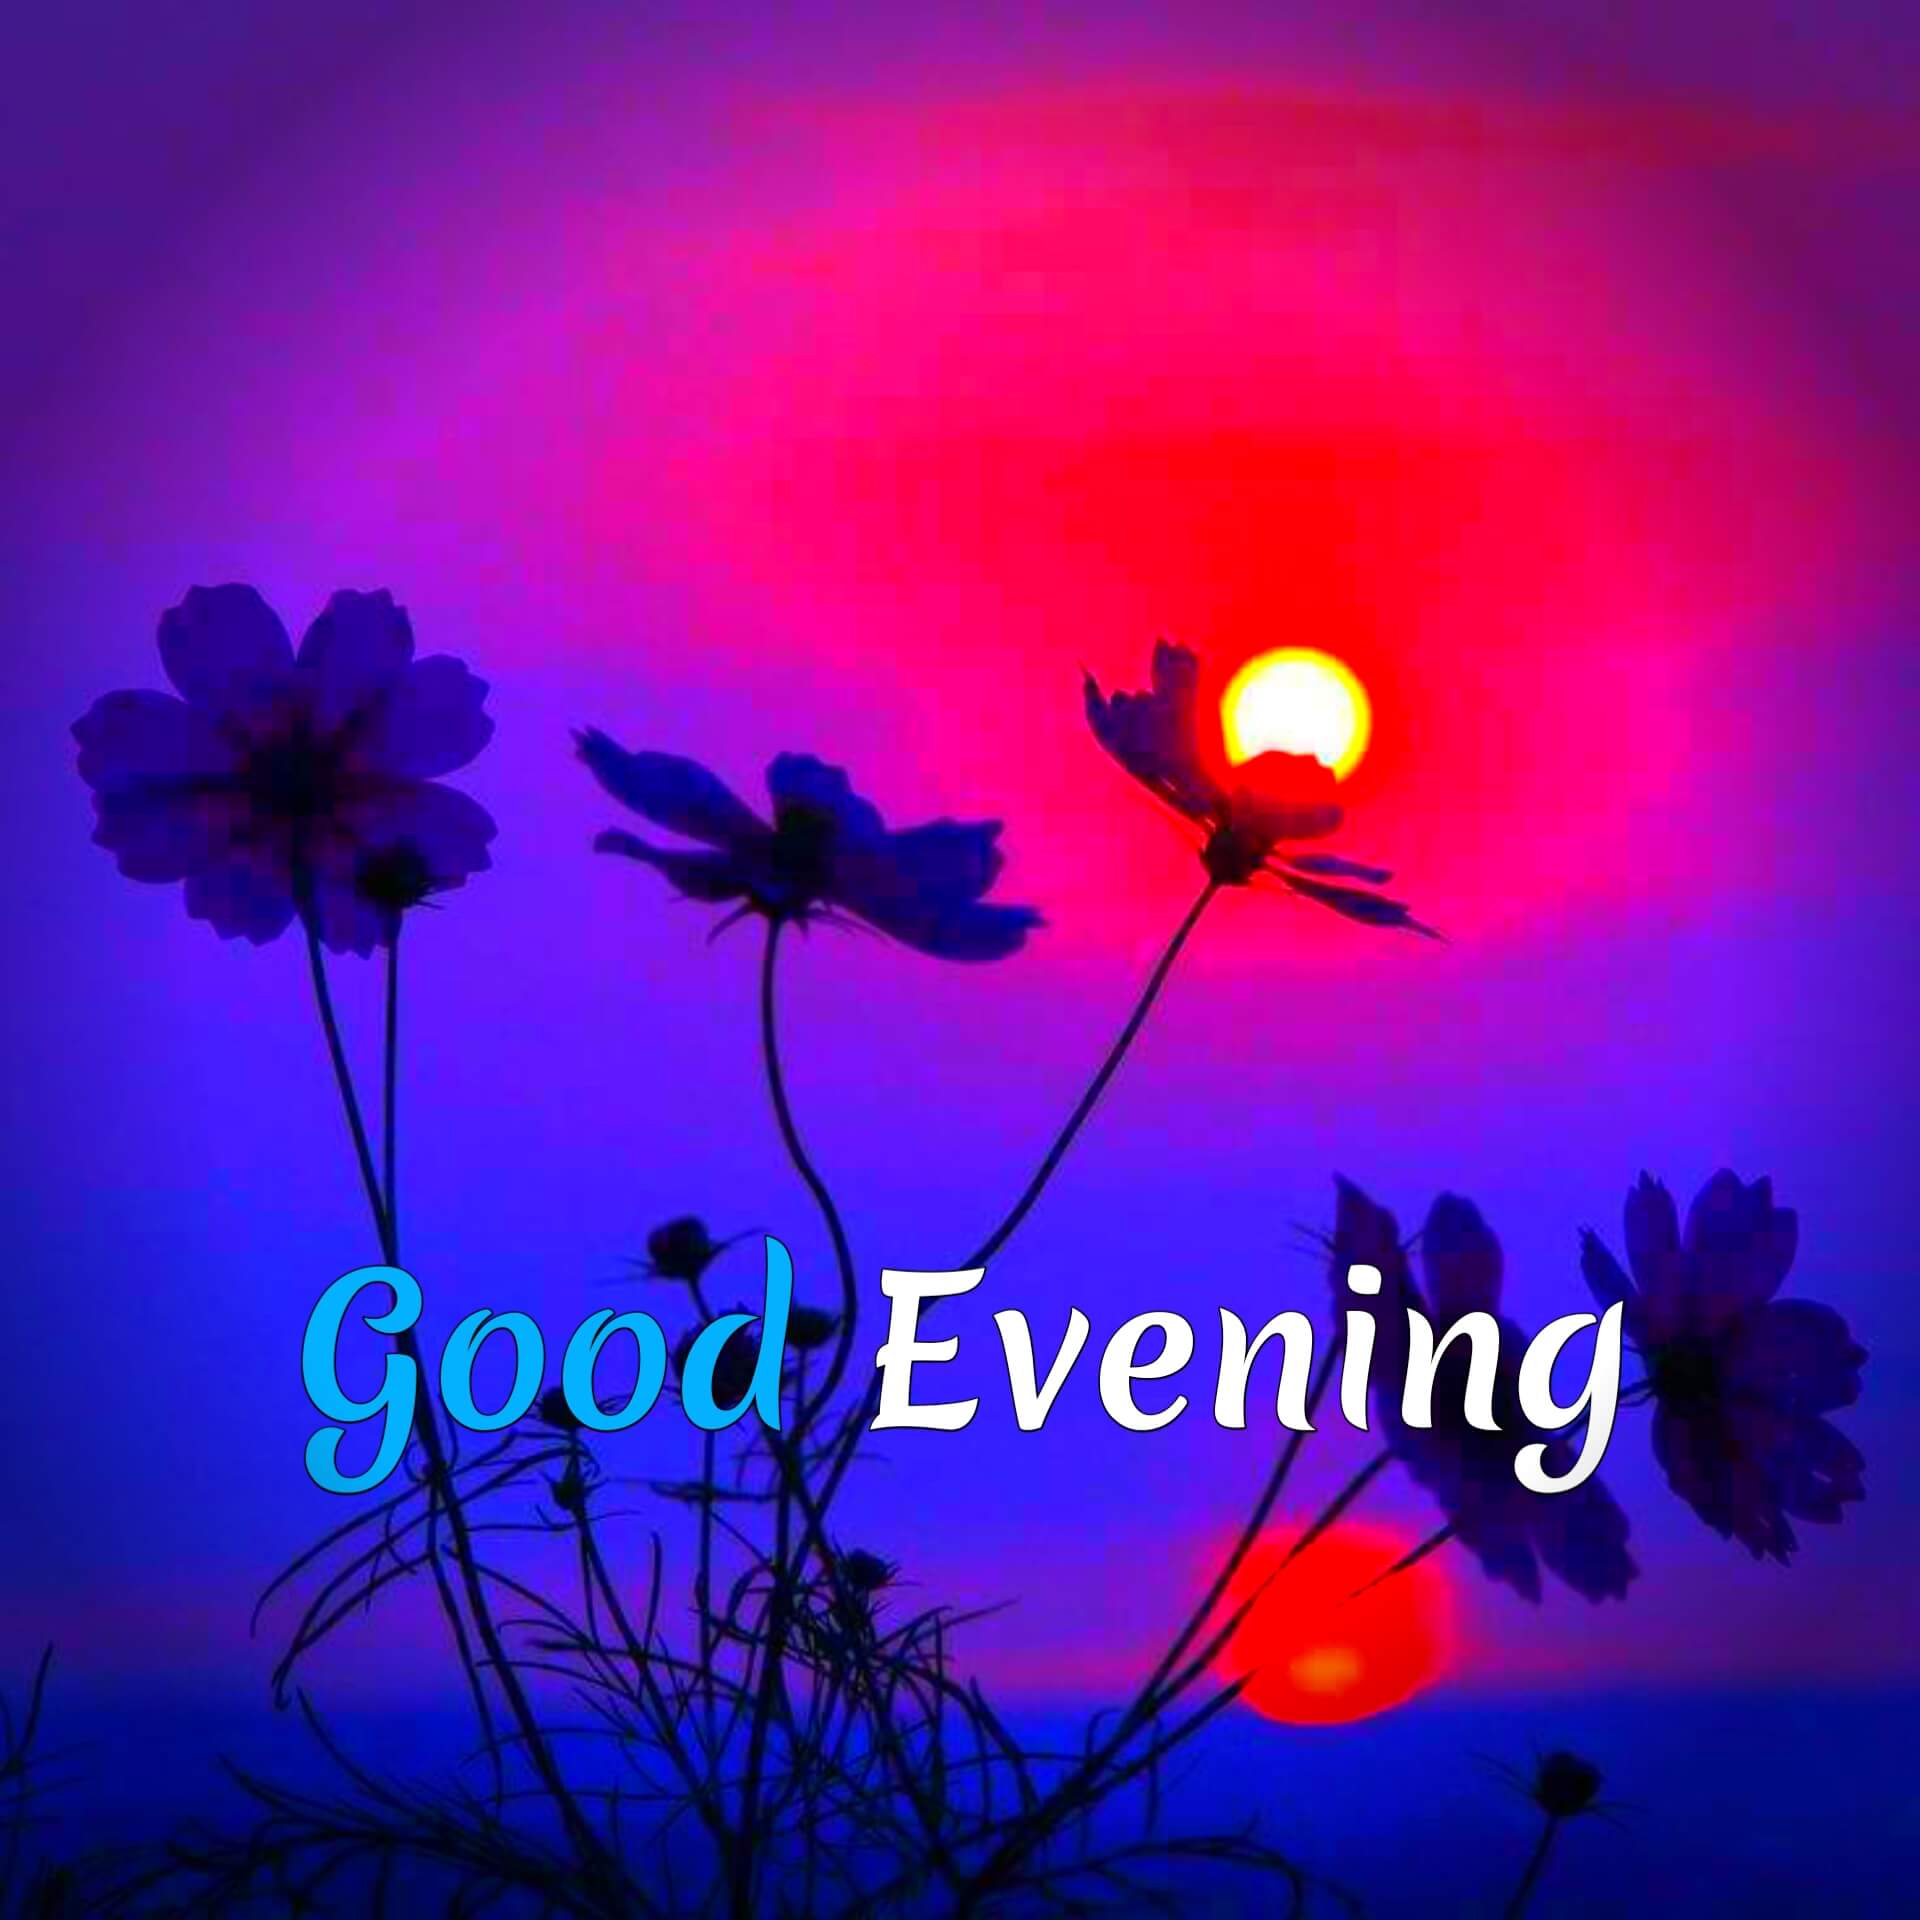 50+ Best Good Evening Images Wishes & Quotes